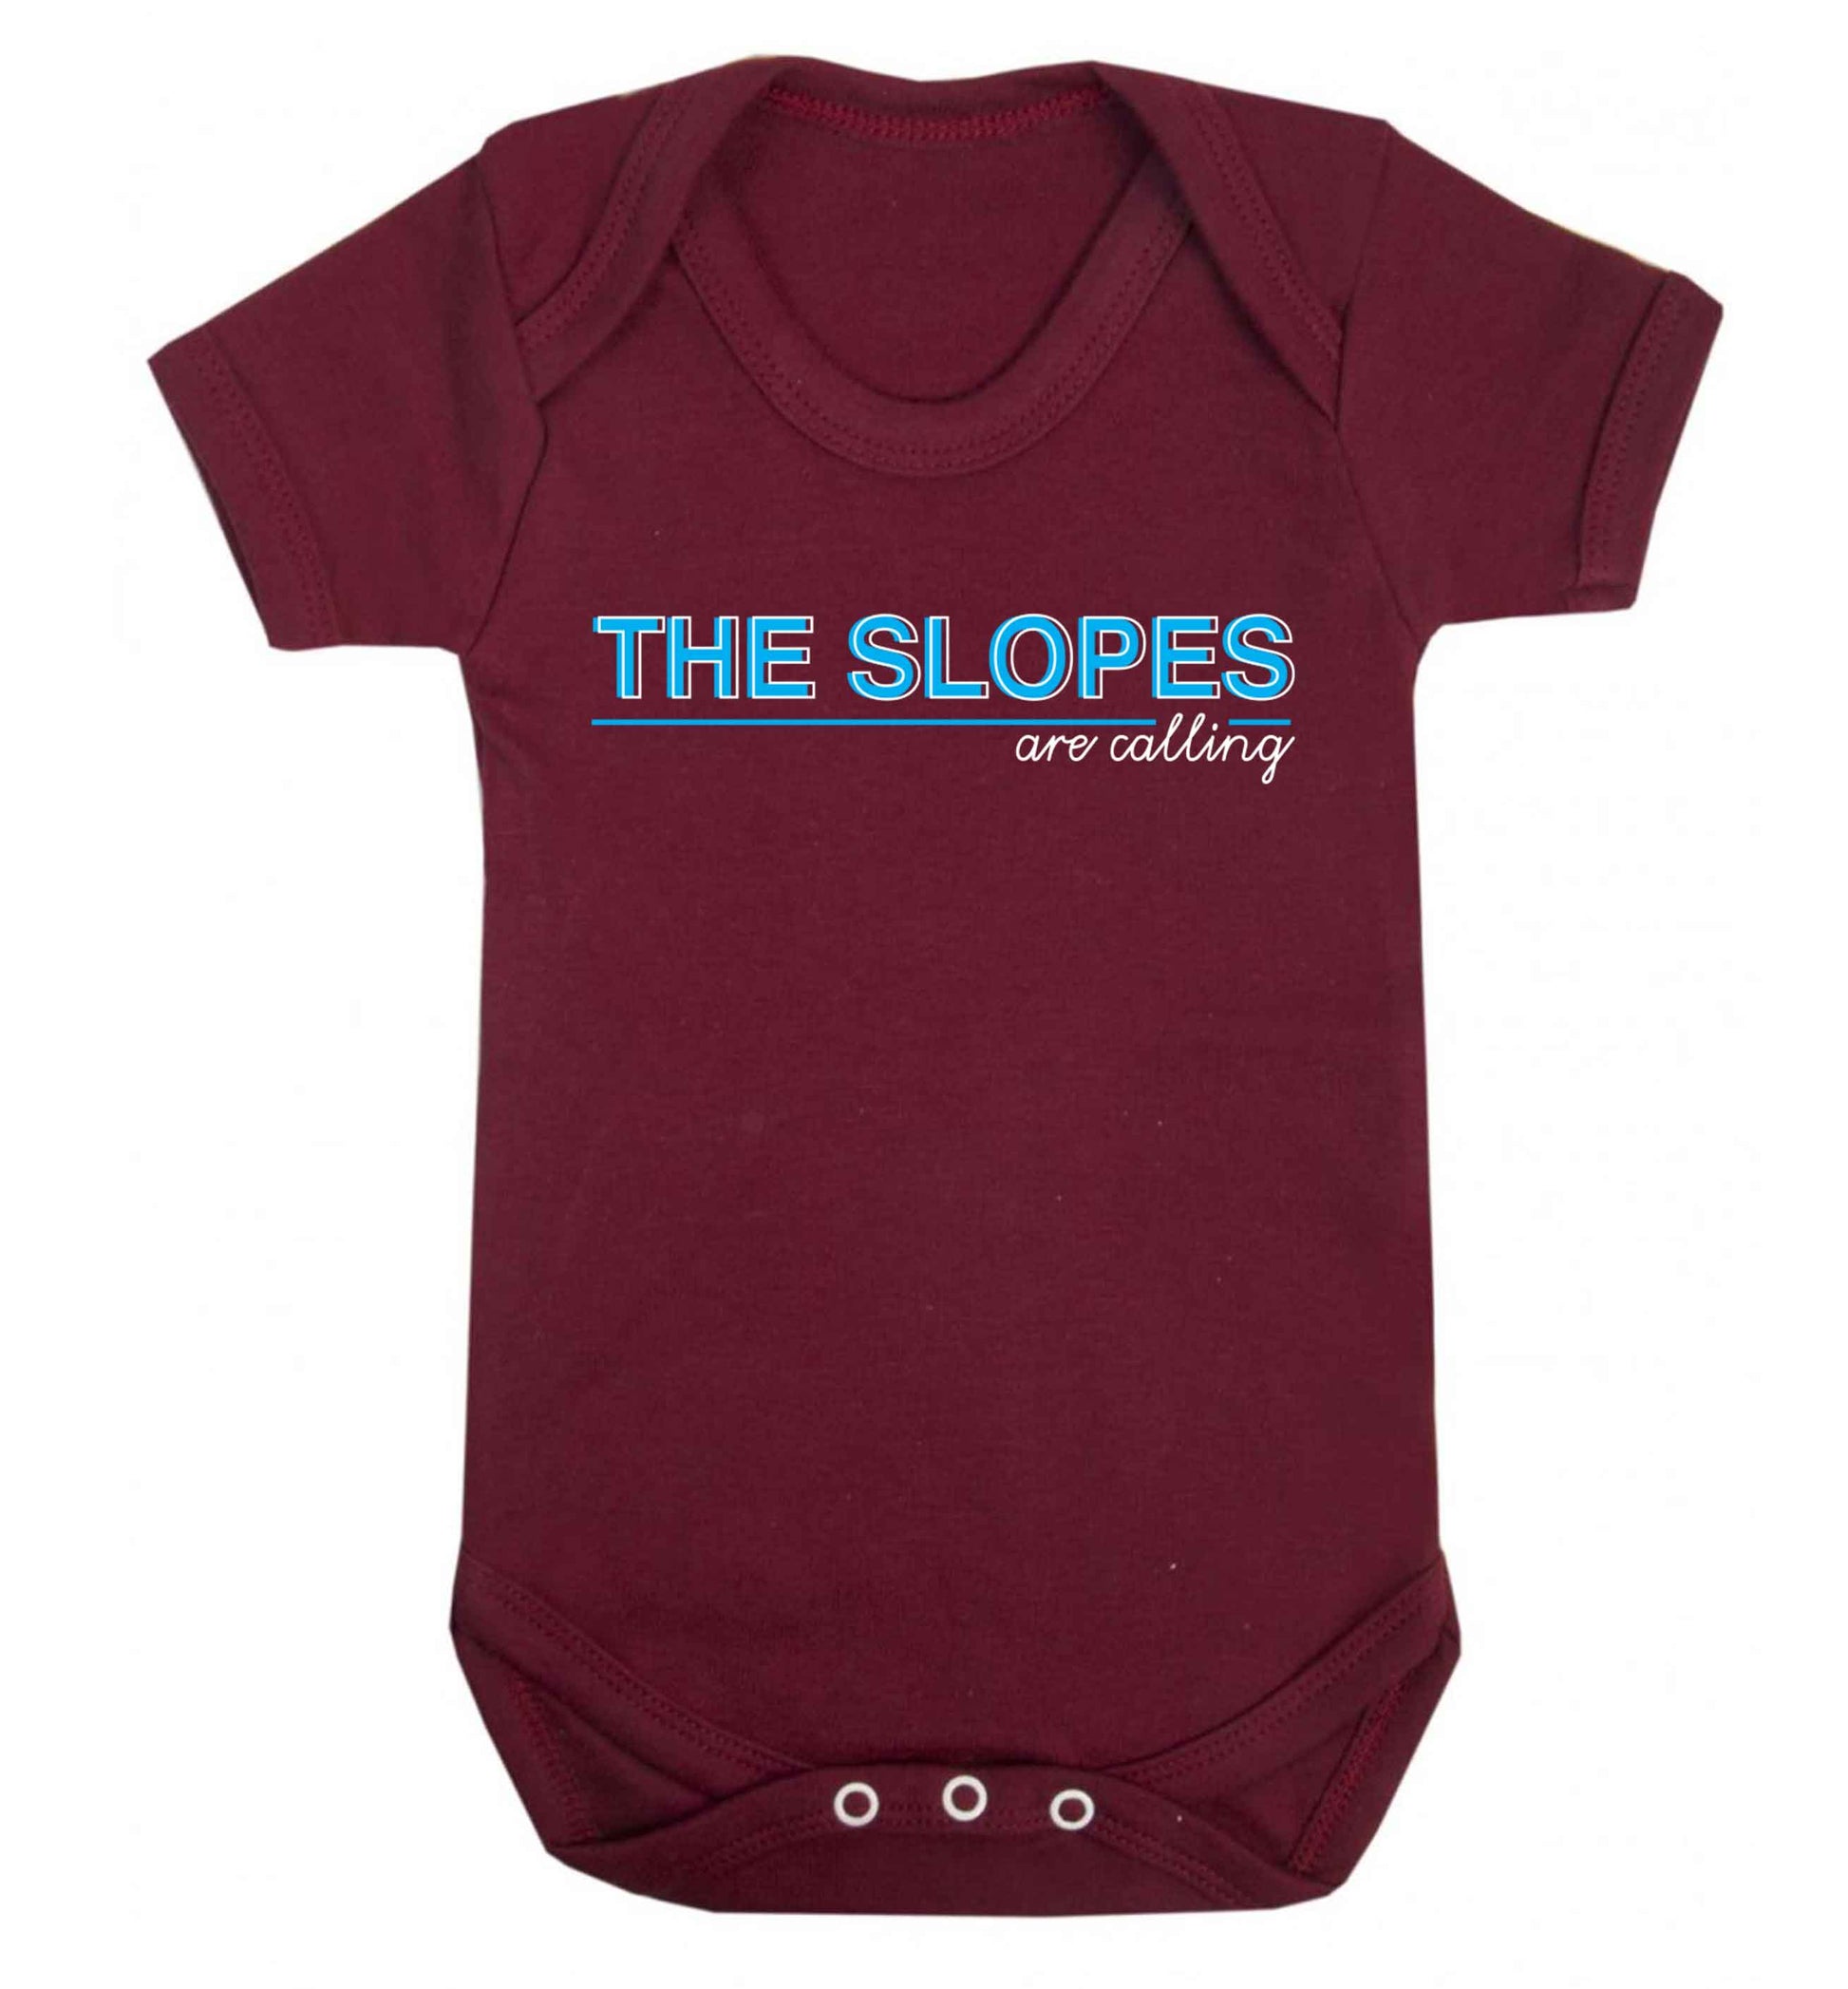 The slopes are calling Baby Vest maroon 18-24 months